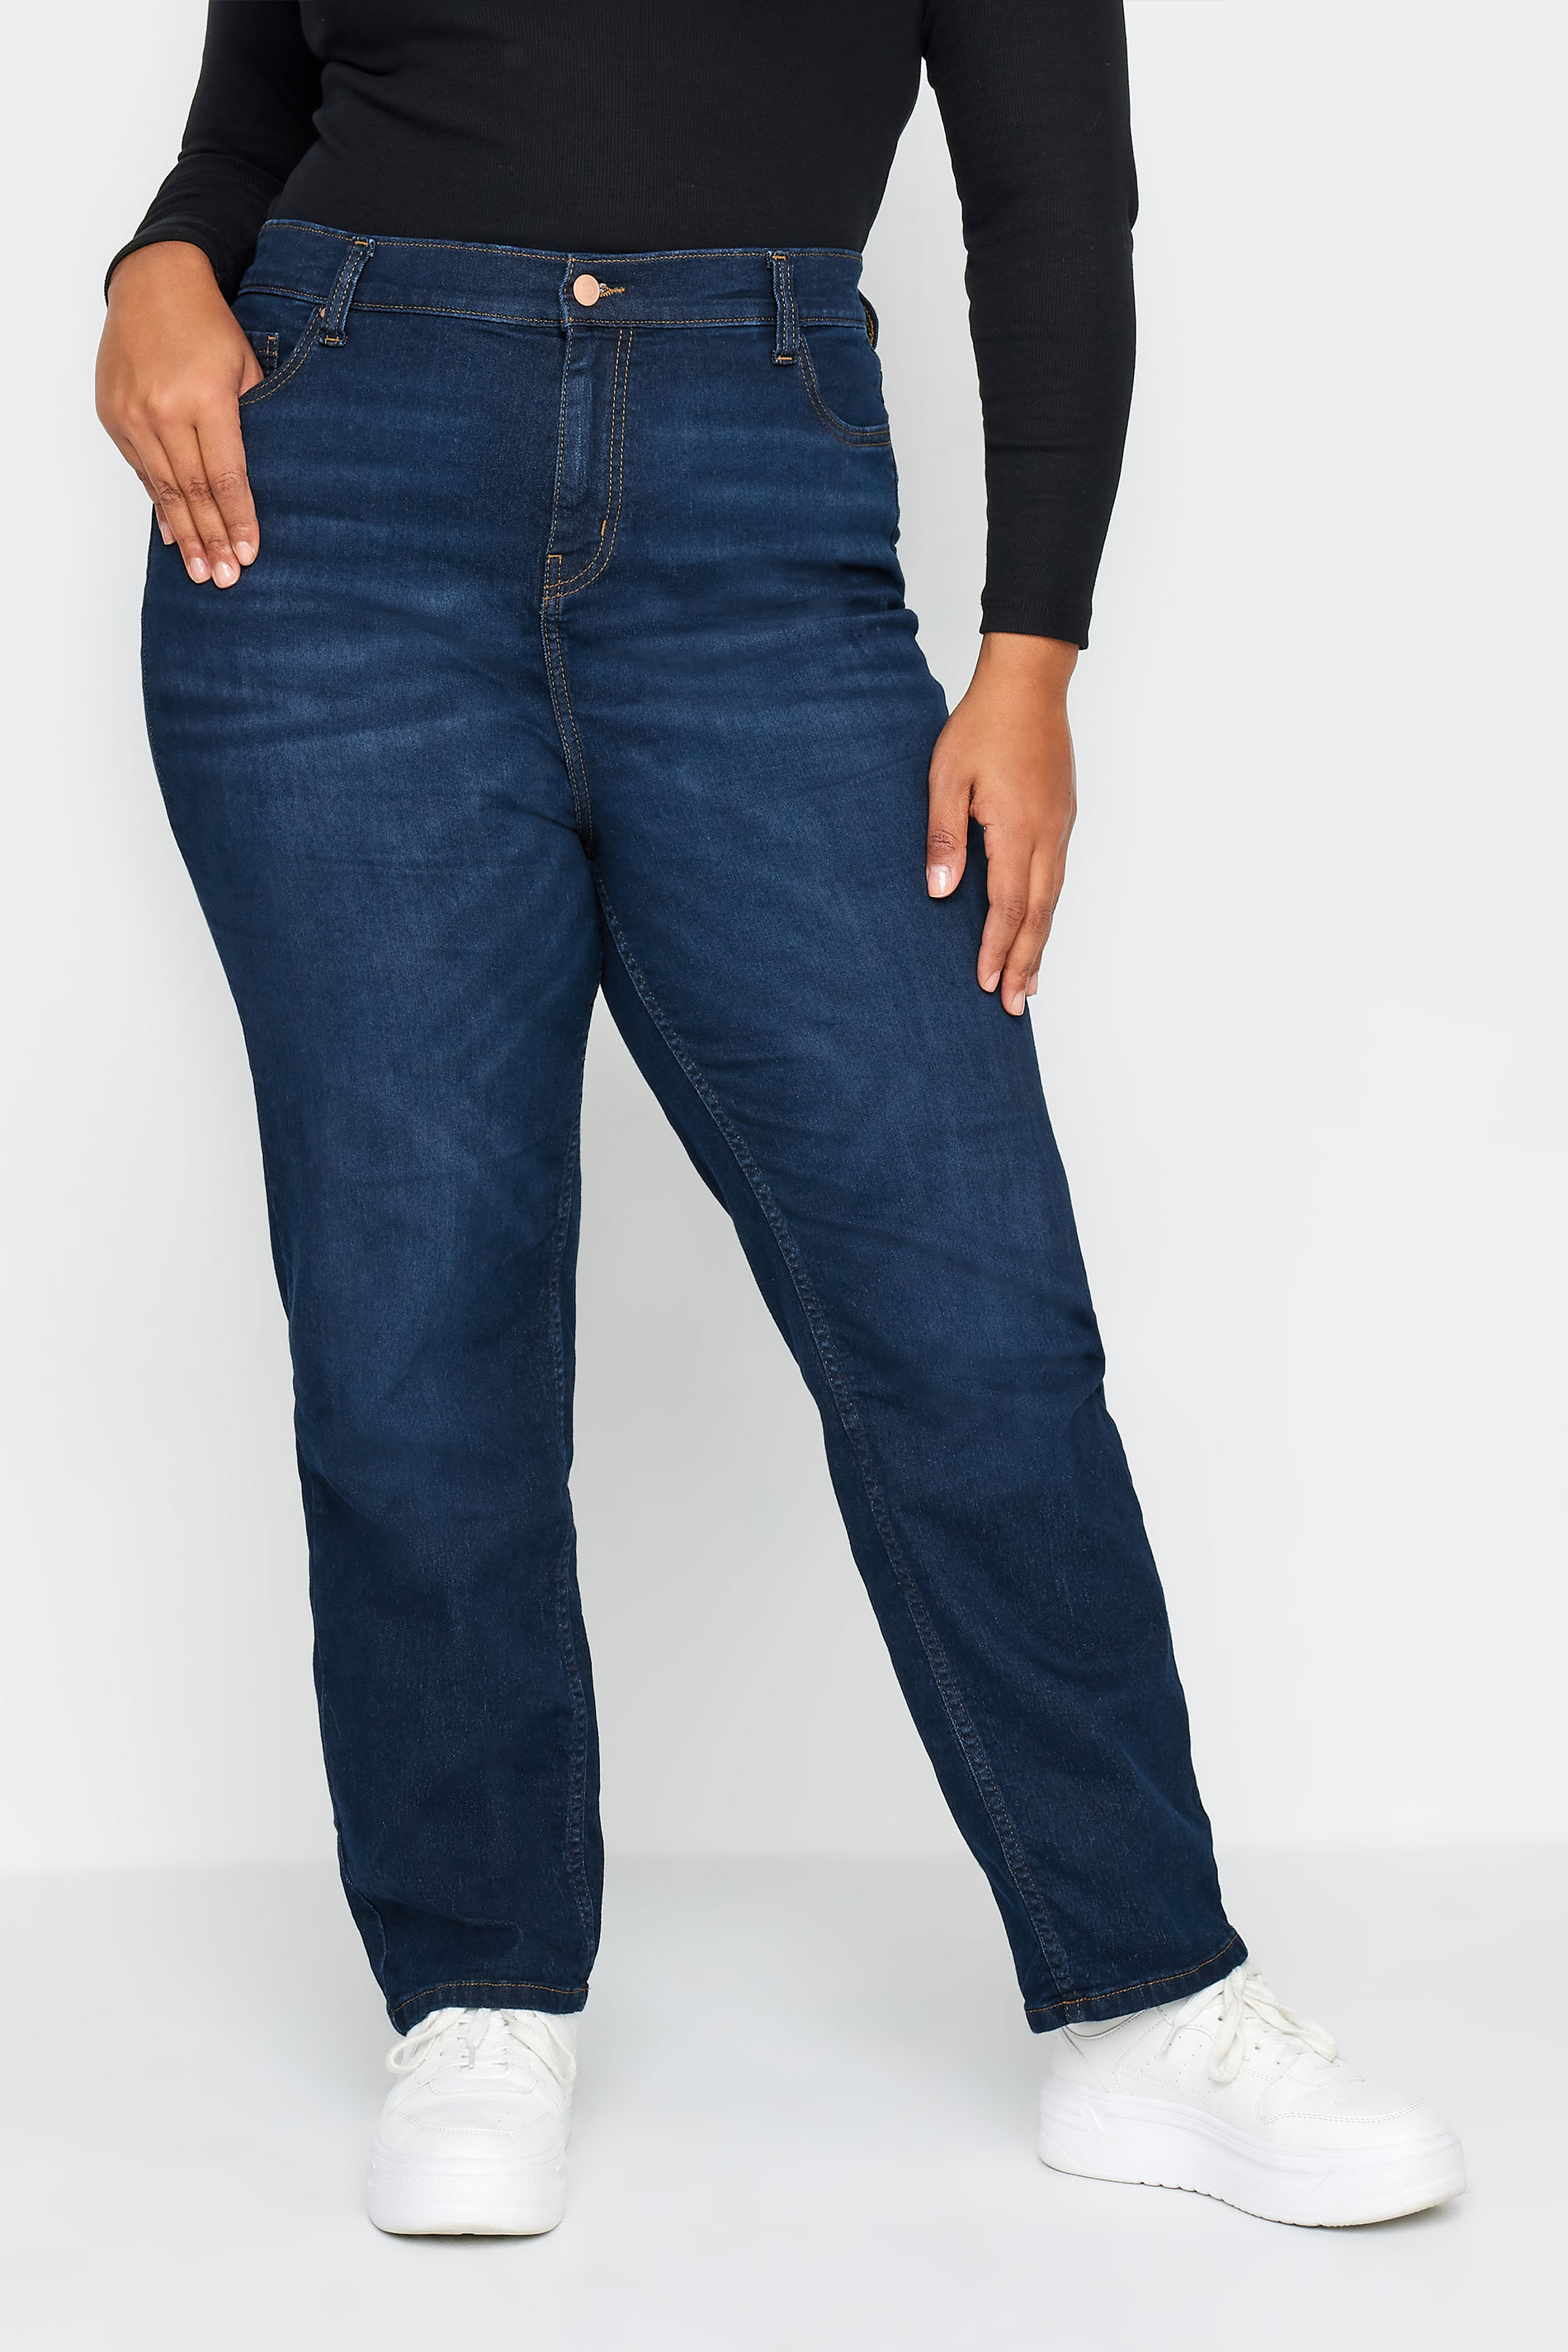 YOURS Plus Size Indigo Blue Straight Leg RUBY Jeans | Yours 1